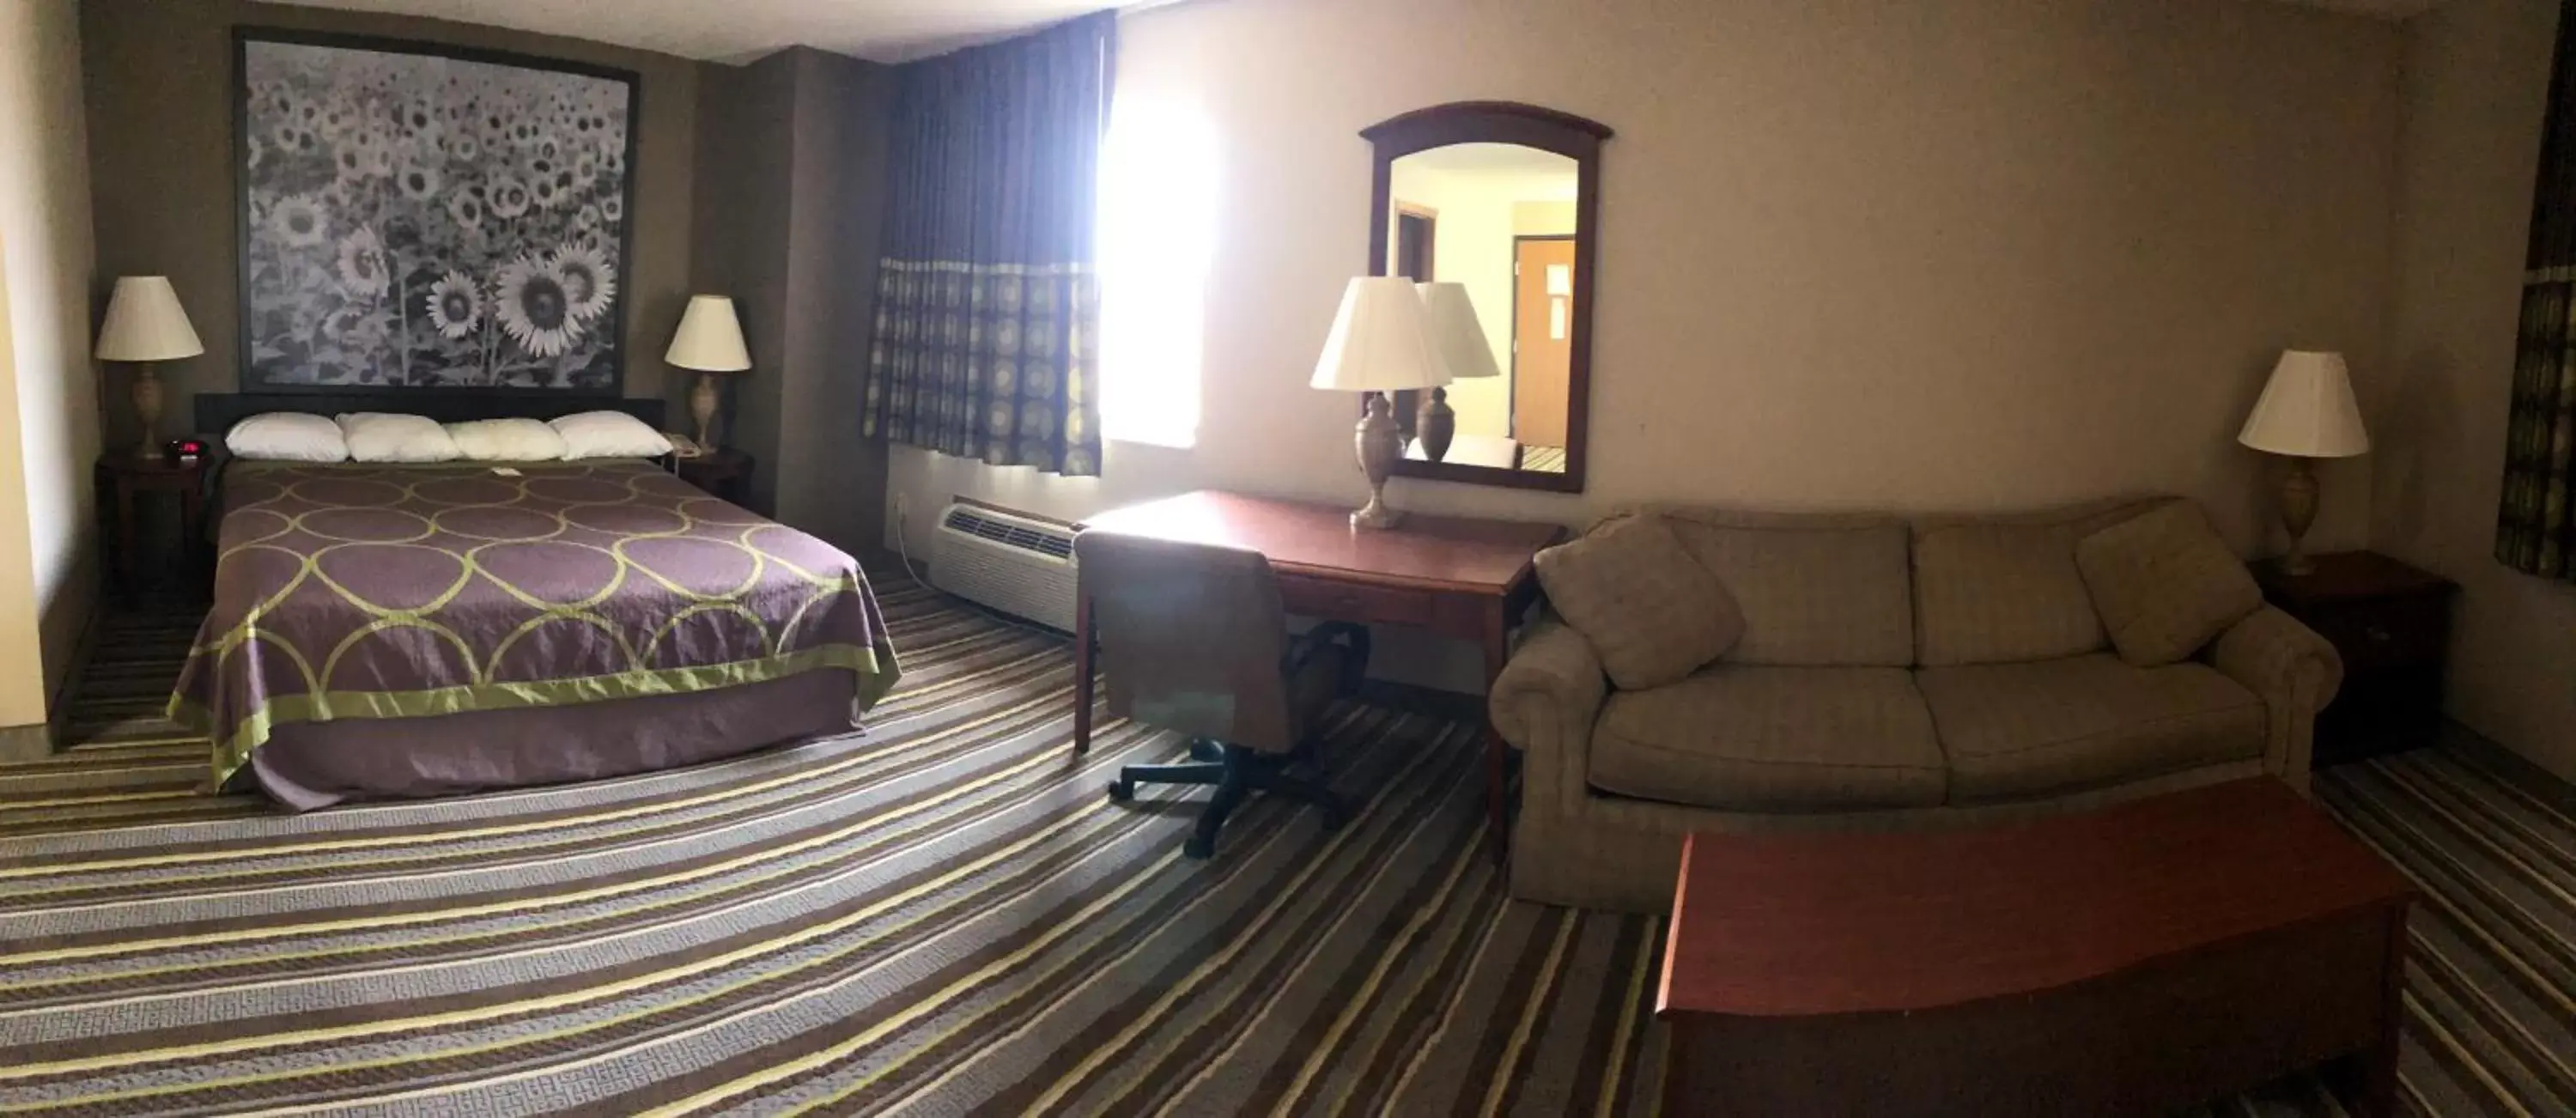 Guests in Super 8 by Wyndham Anamosa IA